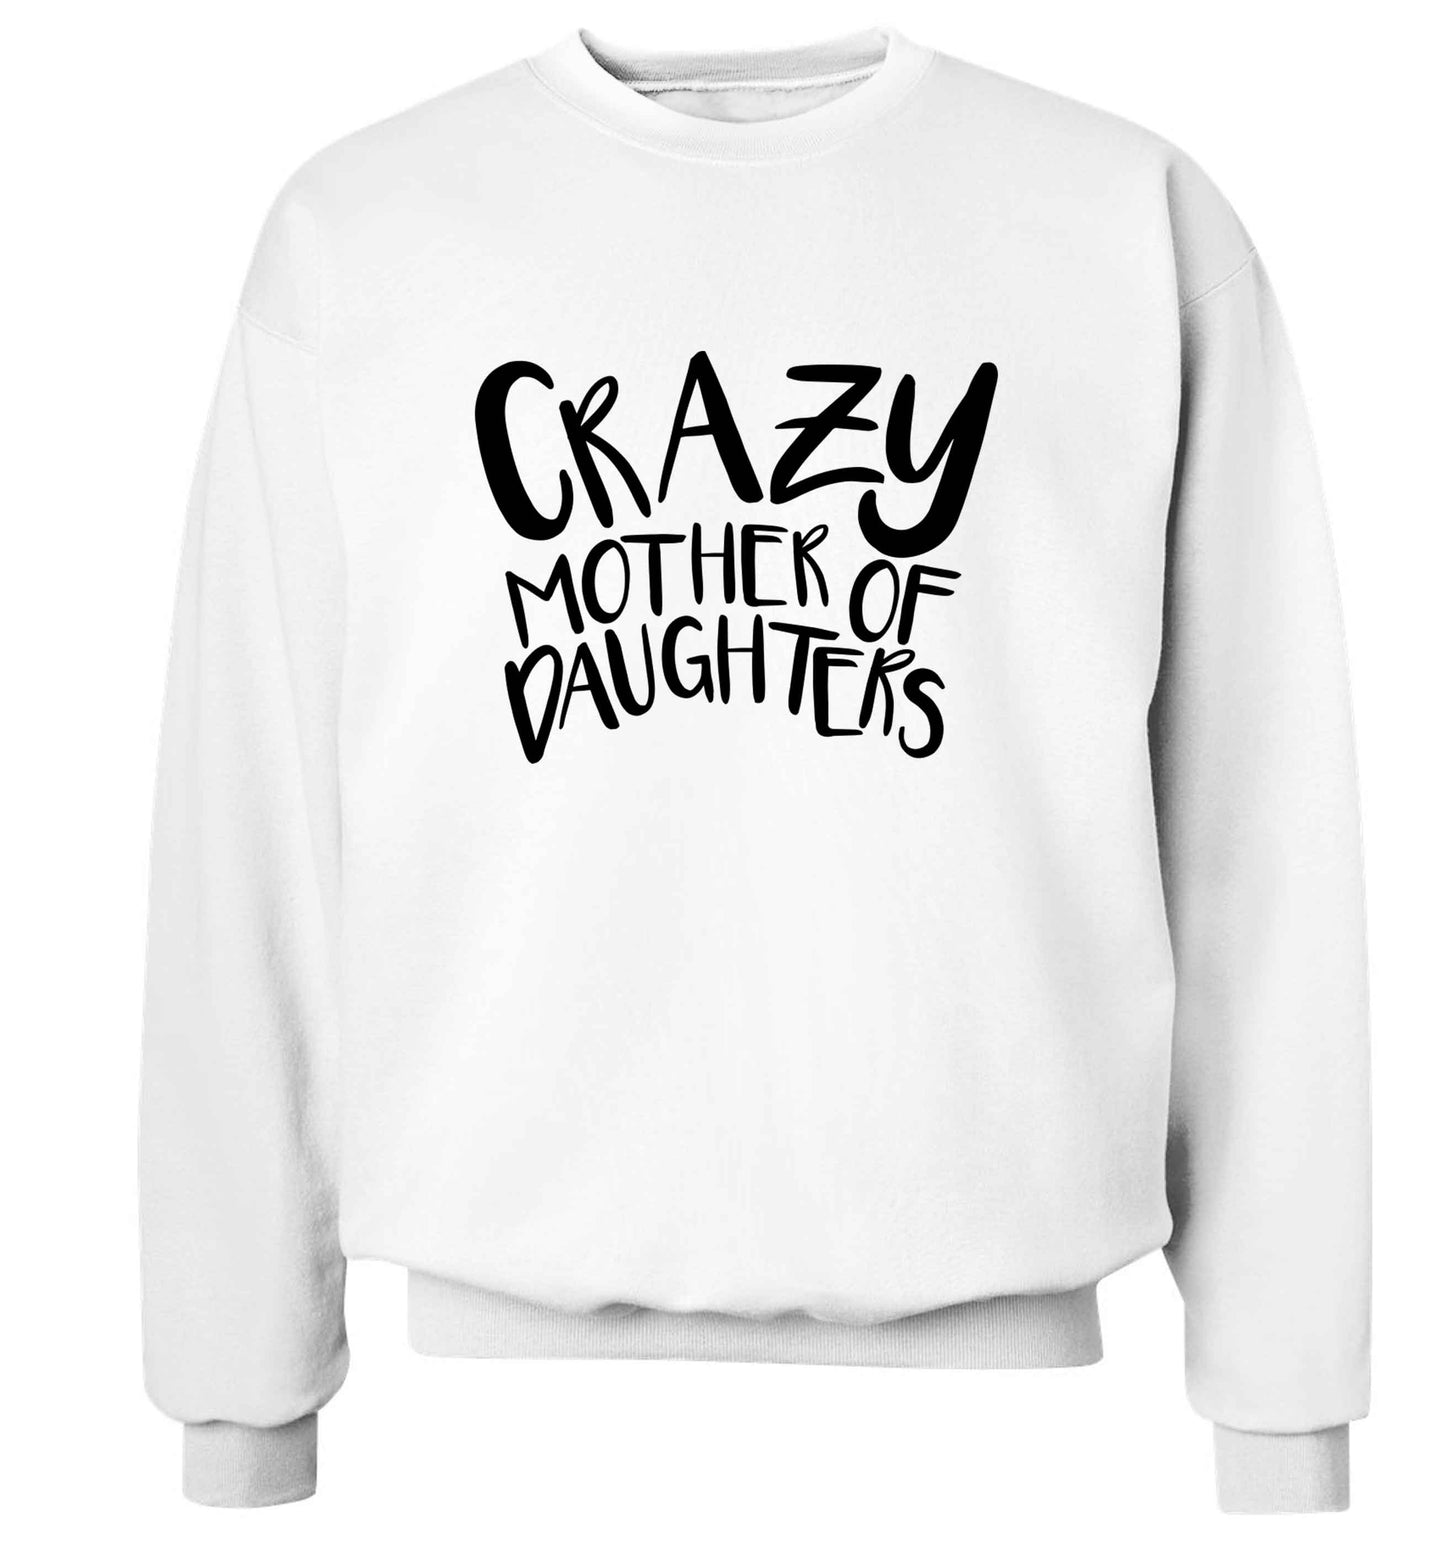 Crazy mother of daughters adult's unisex white sweater 2XL